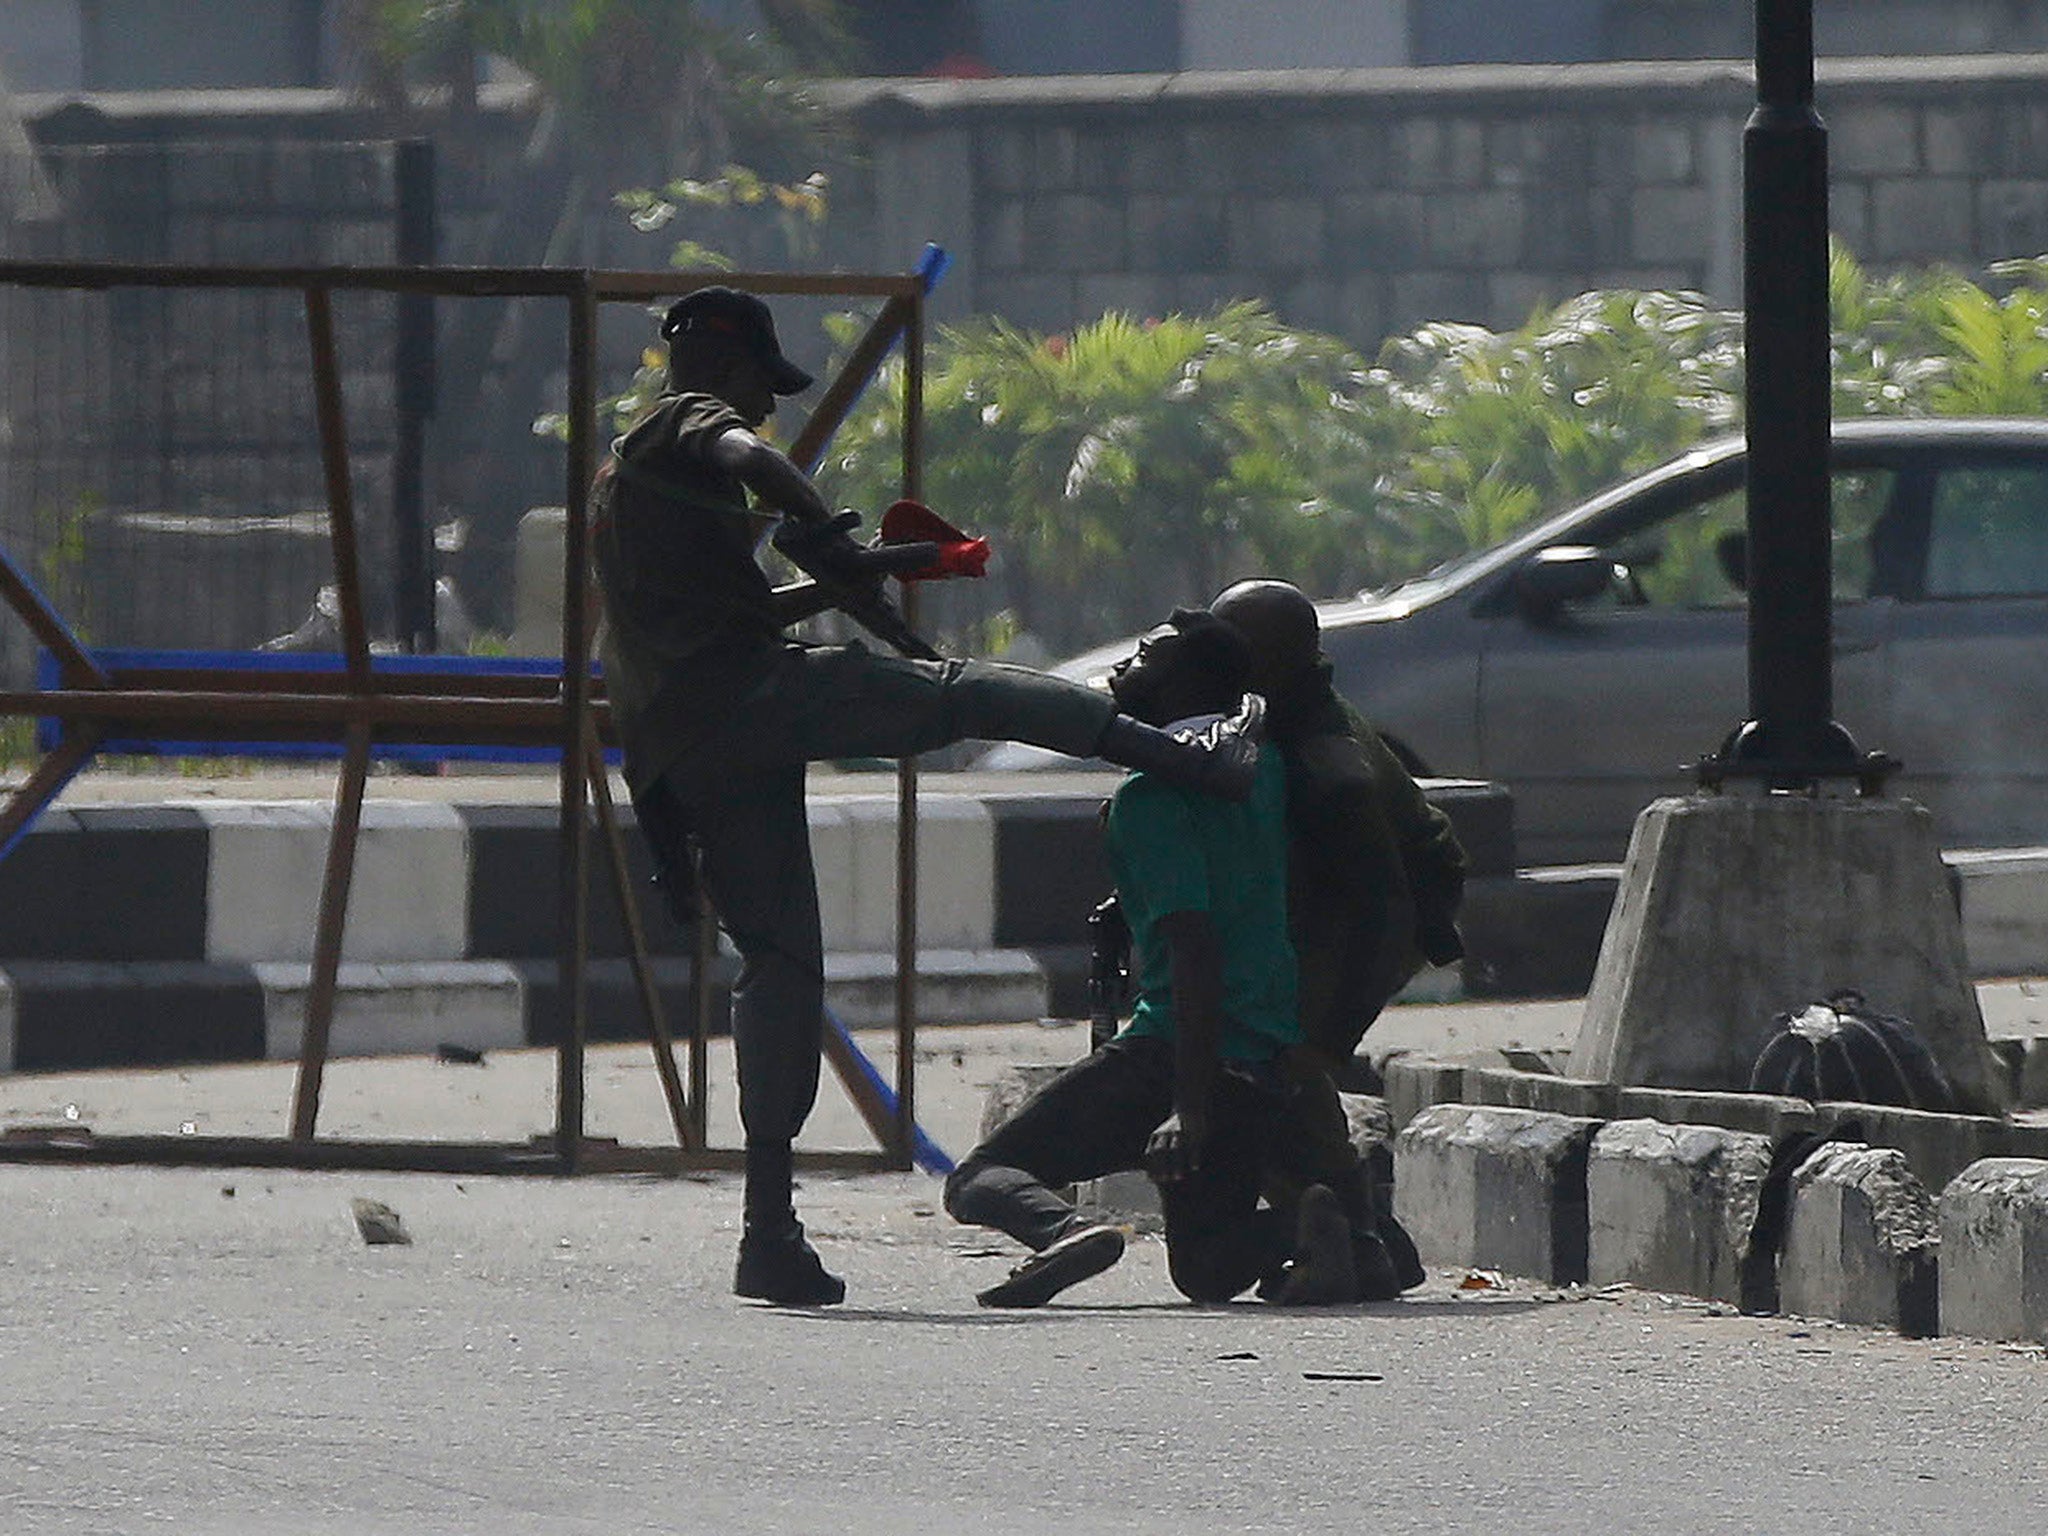 Nigerian security officer kicking protester in Lagos